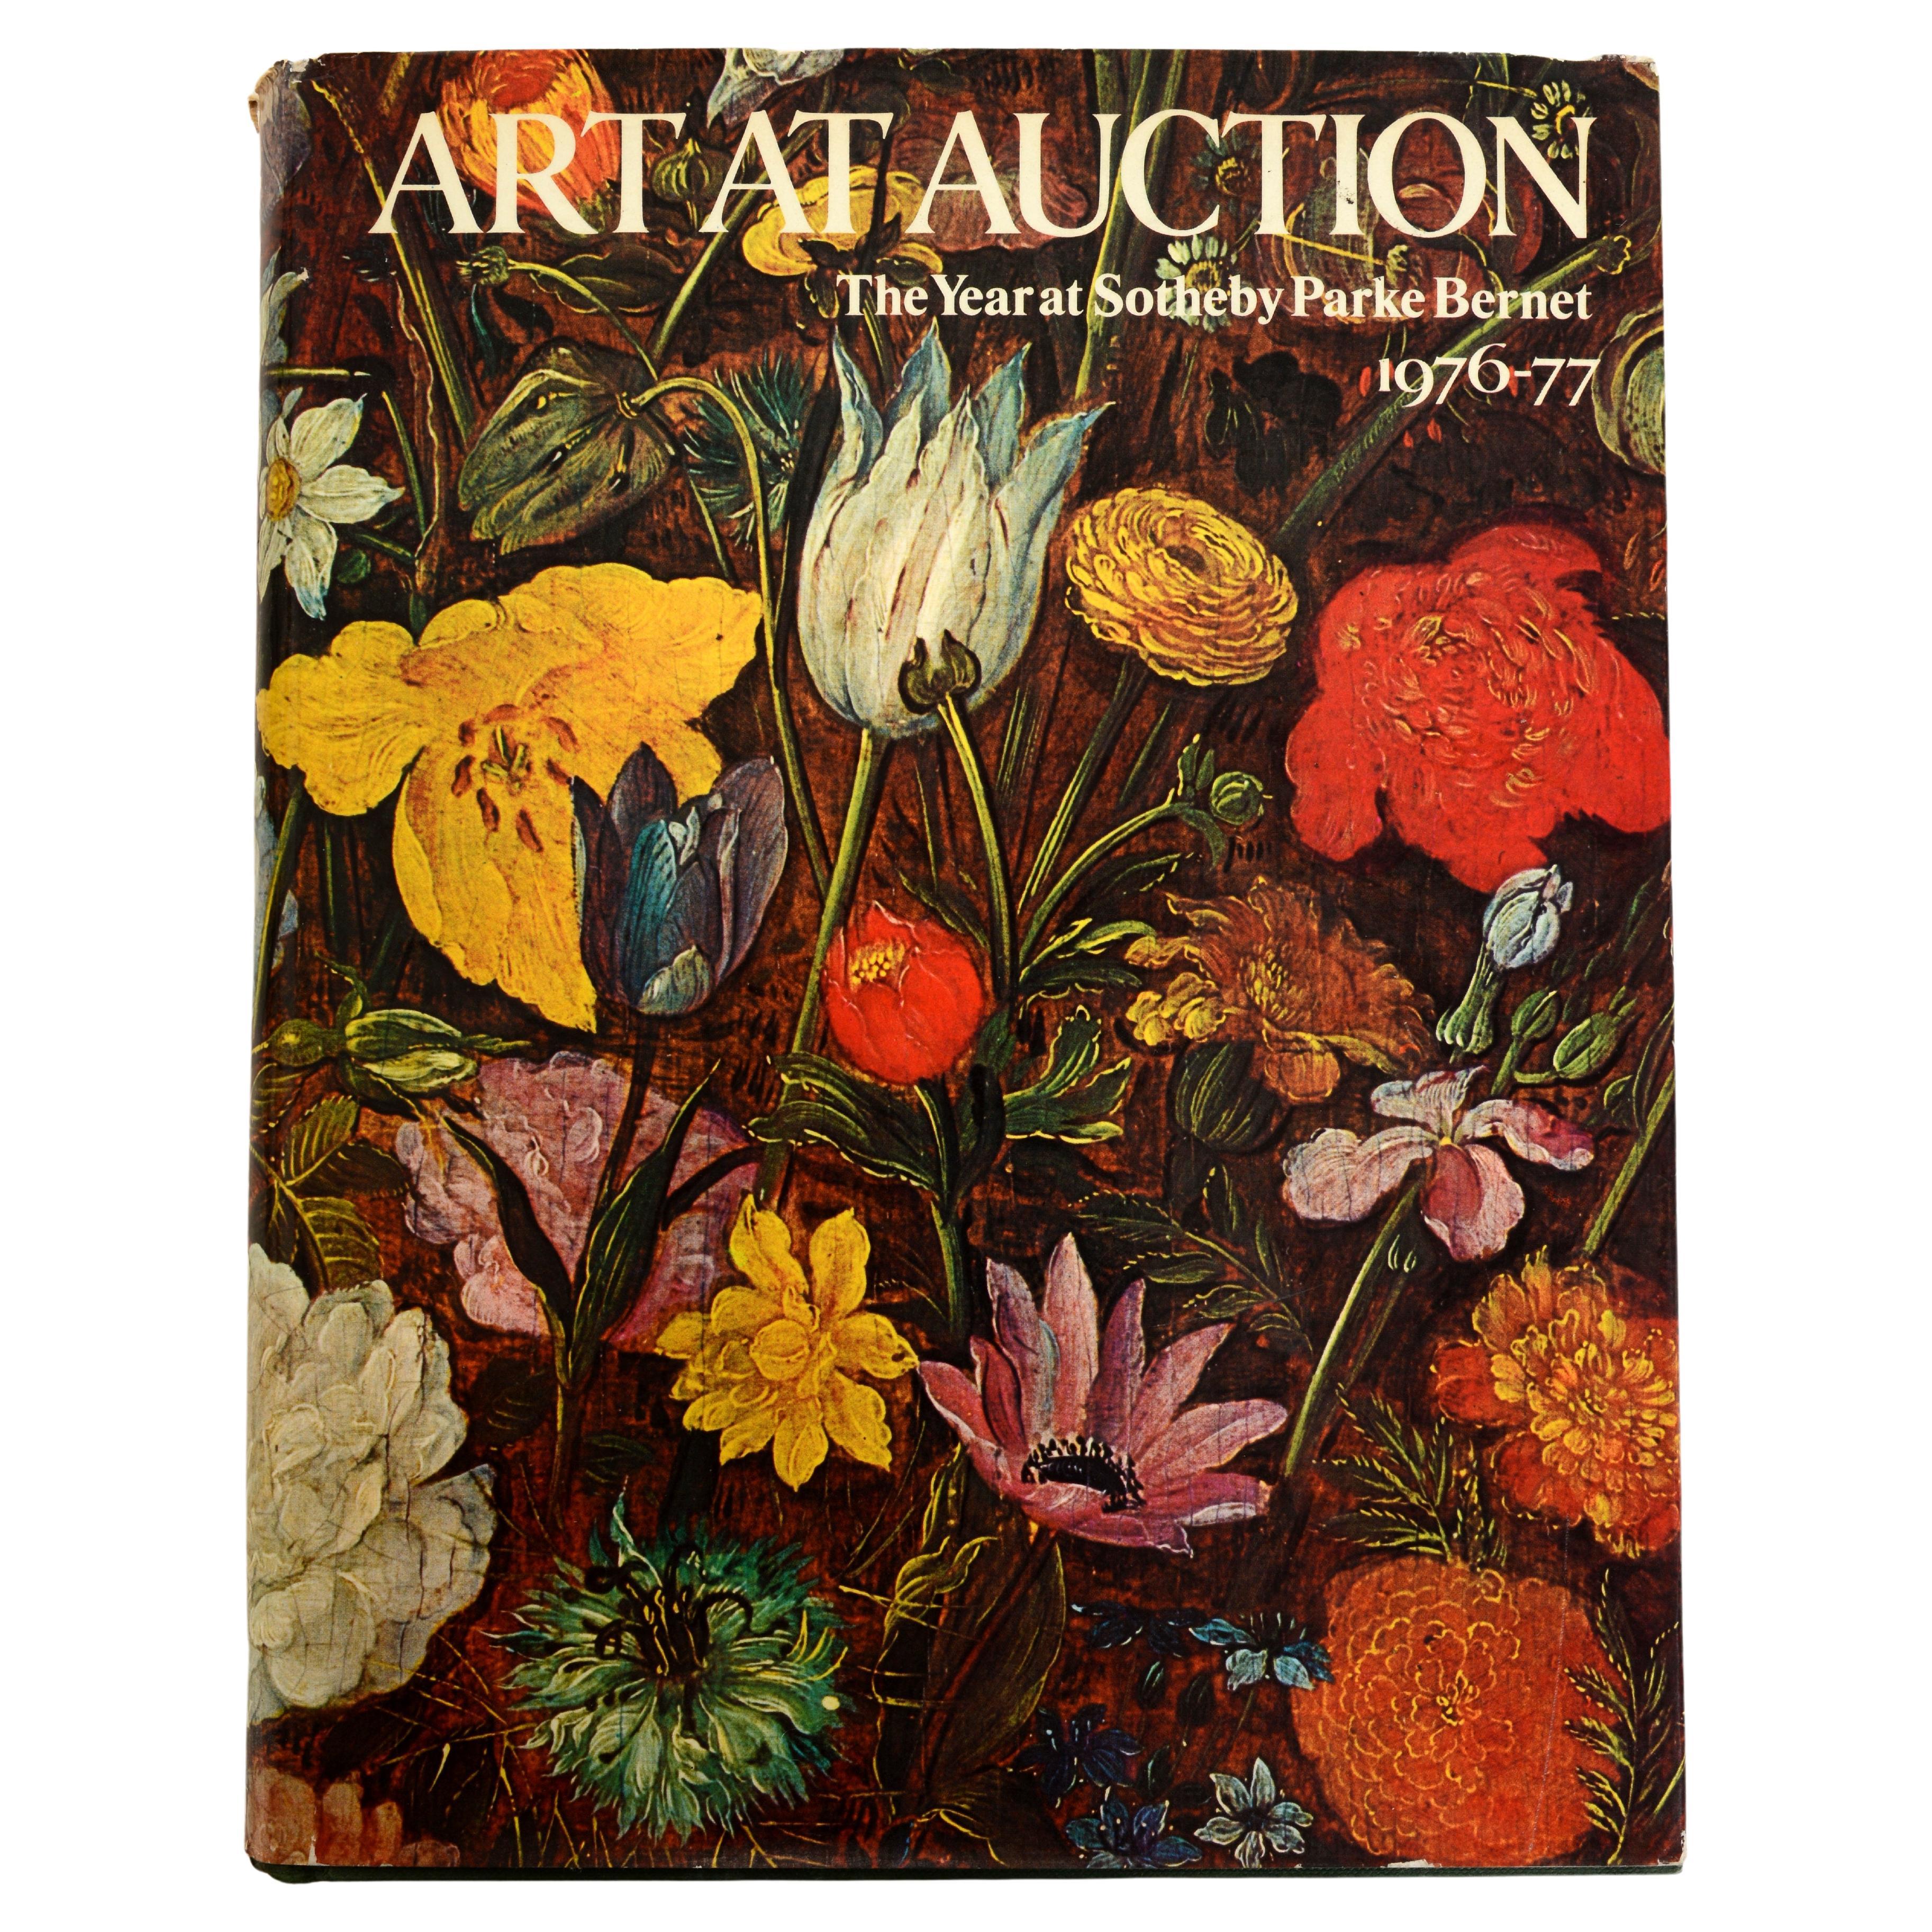 Art at Auction: the Year at Sotheby Parke Bernet 1976-77, Edited by Anne Jackson